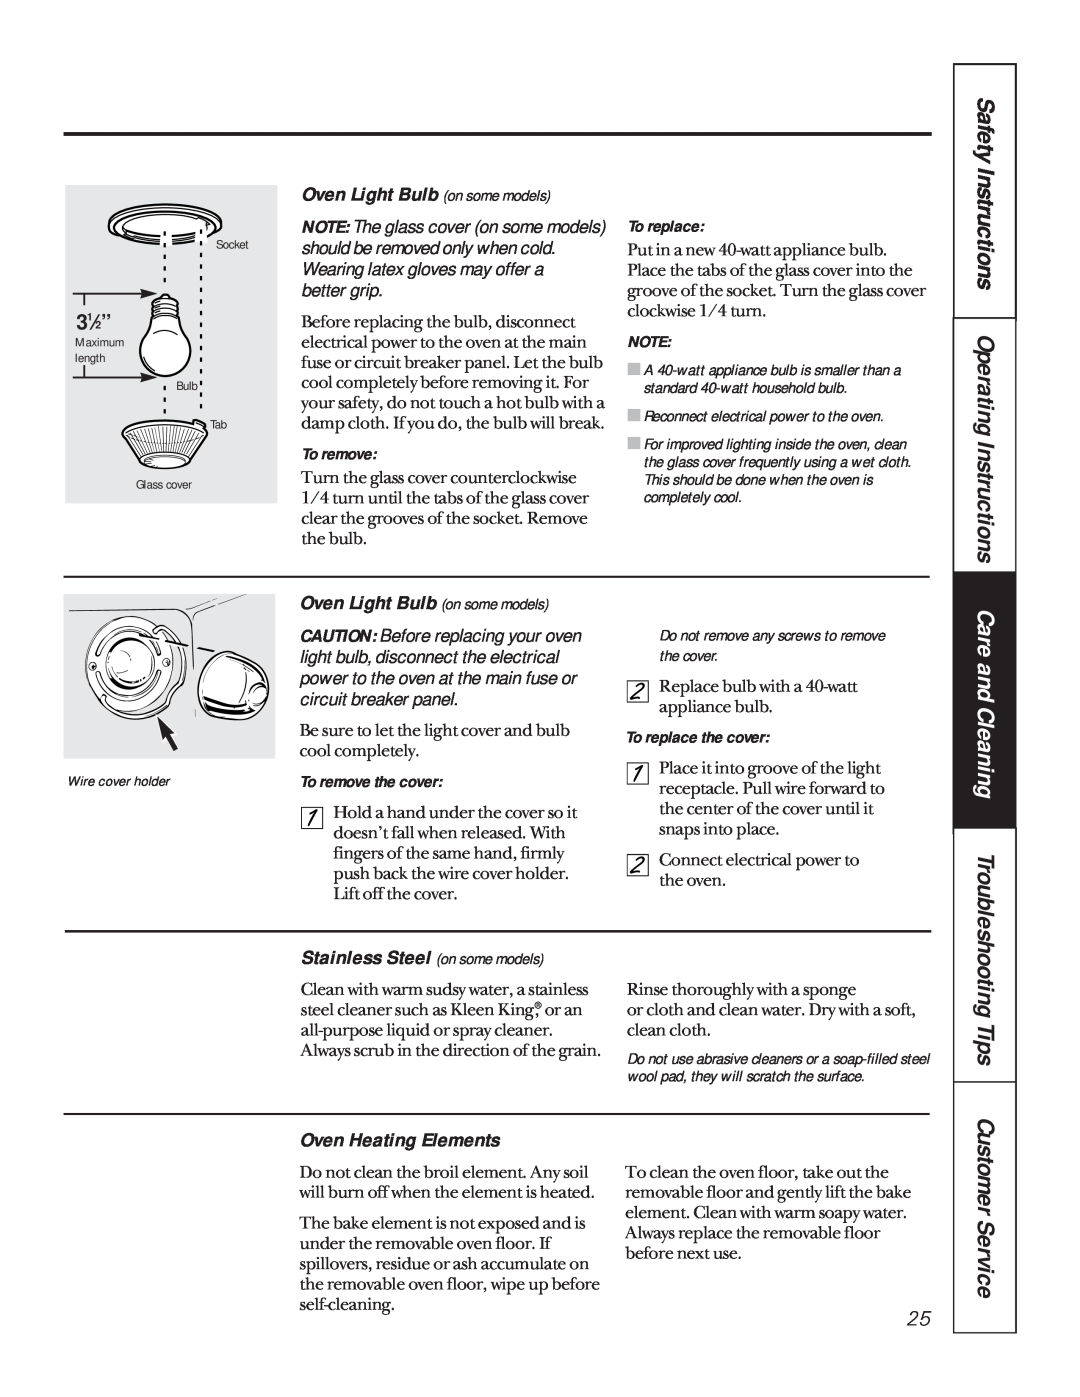 GE jk910 Safety Instructions Operating Instructions, Oven Light Bulb on some models, Stainless Steel on some models, Tips 